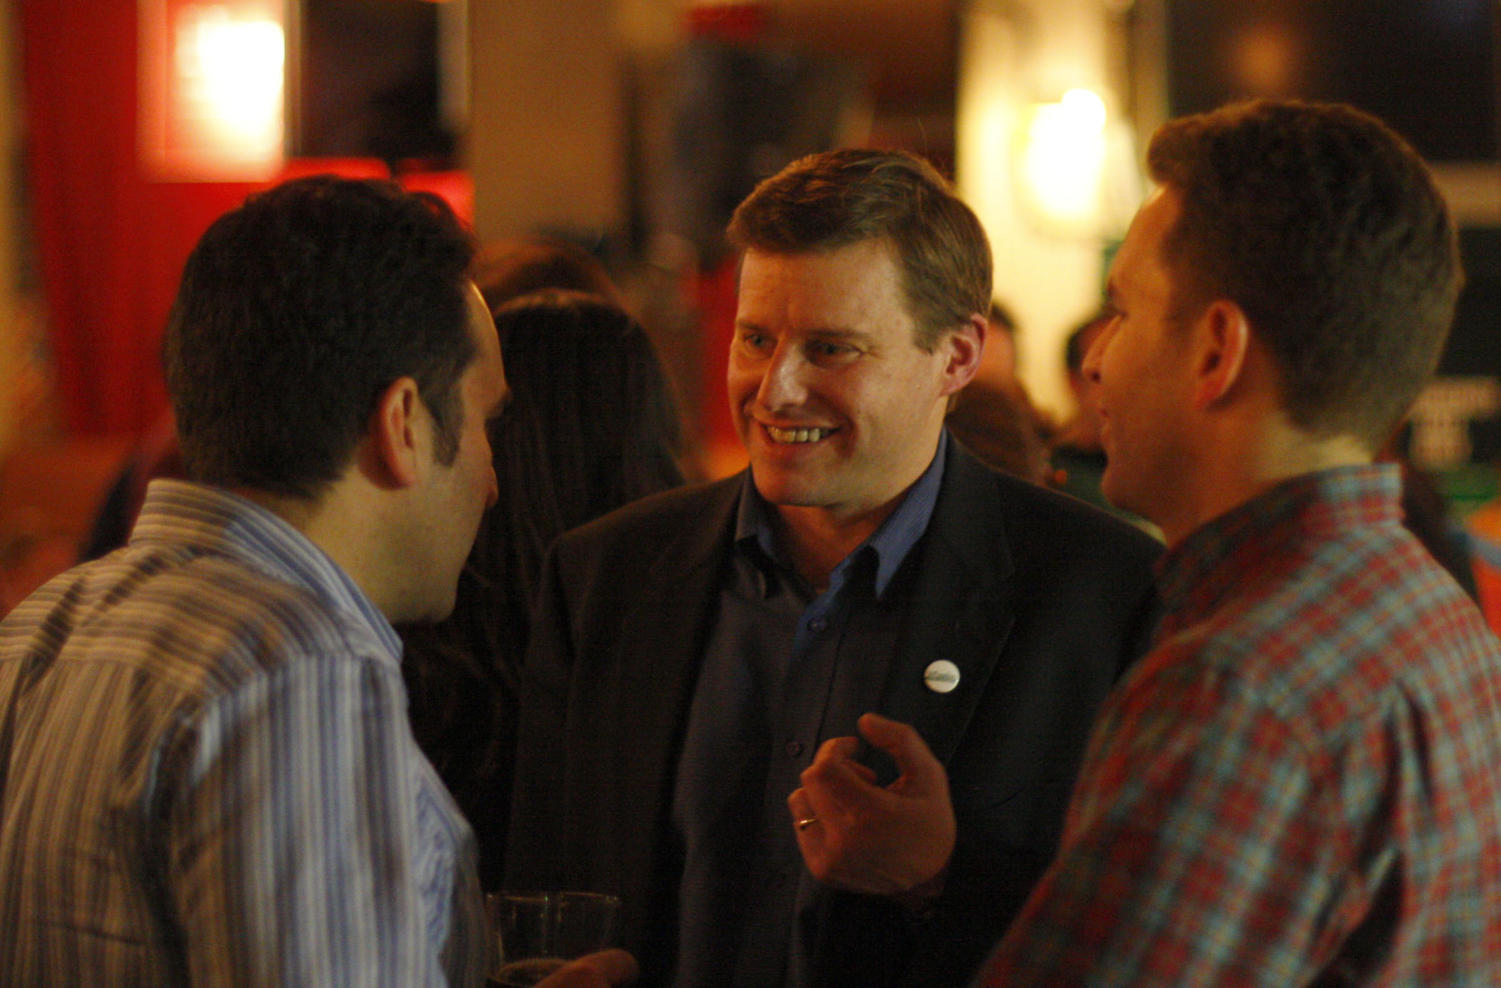 Charles Wheelan, professor at the Harris School of Public Policy, speaks with two supporters on the night of the Illinois's 5th Congressional District Democratic primary Tuesday. Later in the night, Wheelan conceded at the Goose Island Brewery in front of family, friends, and supporters.